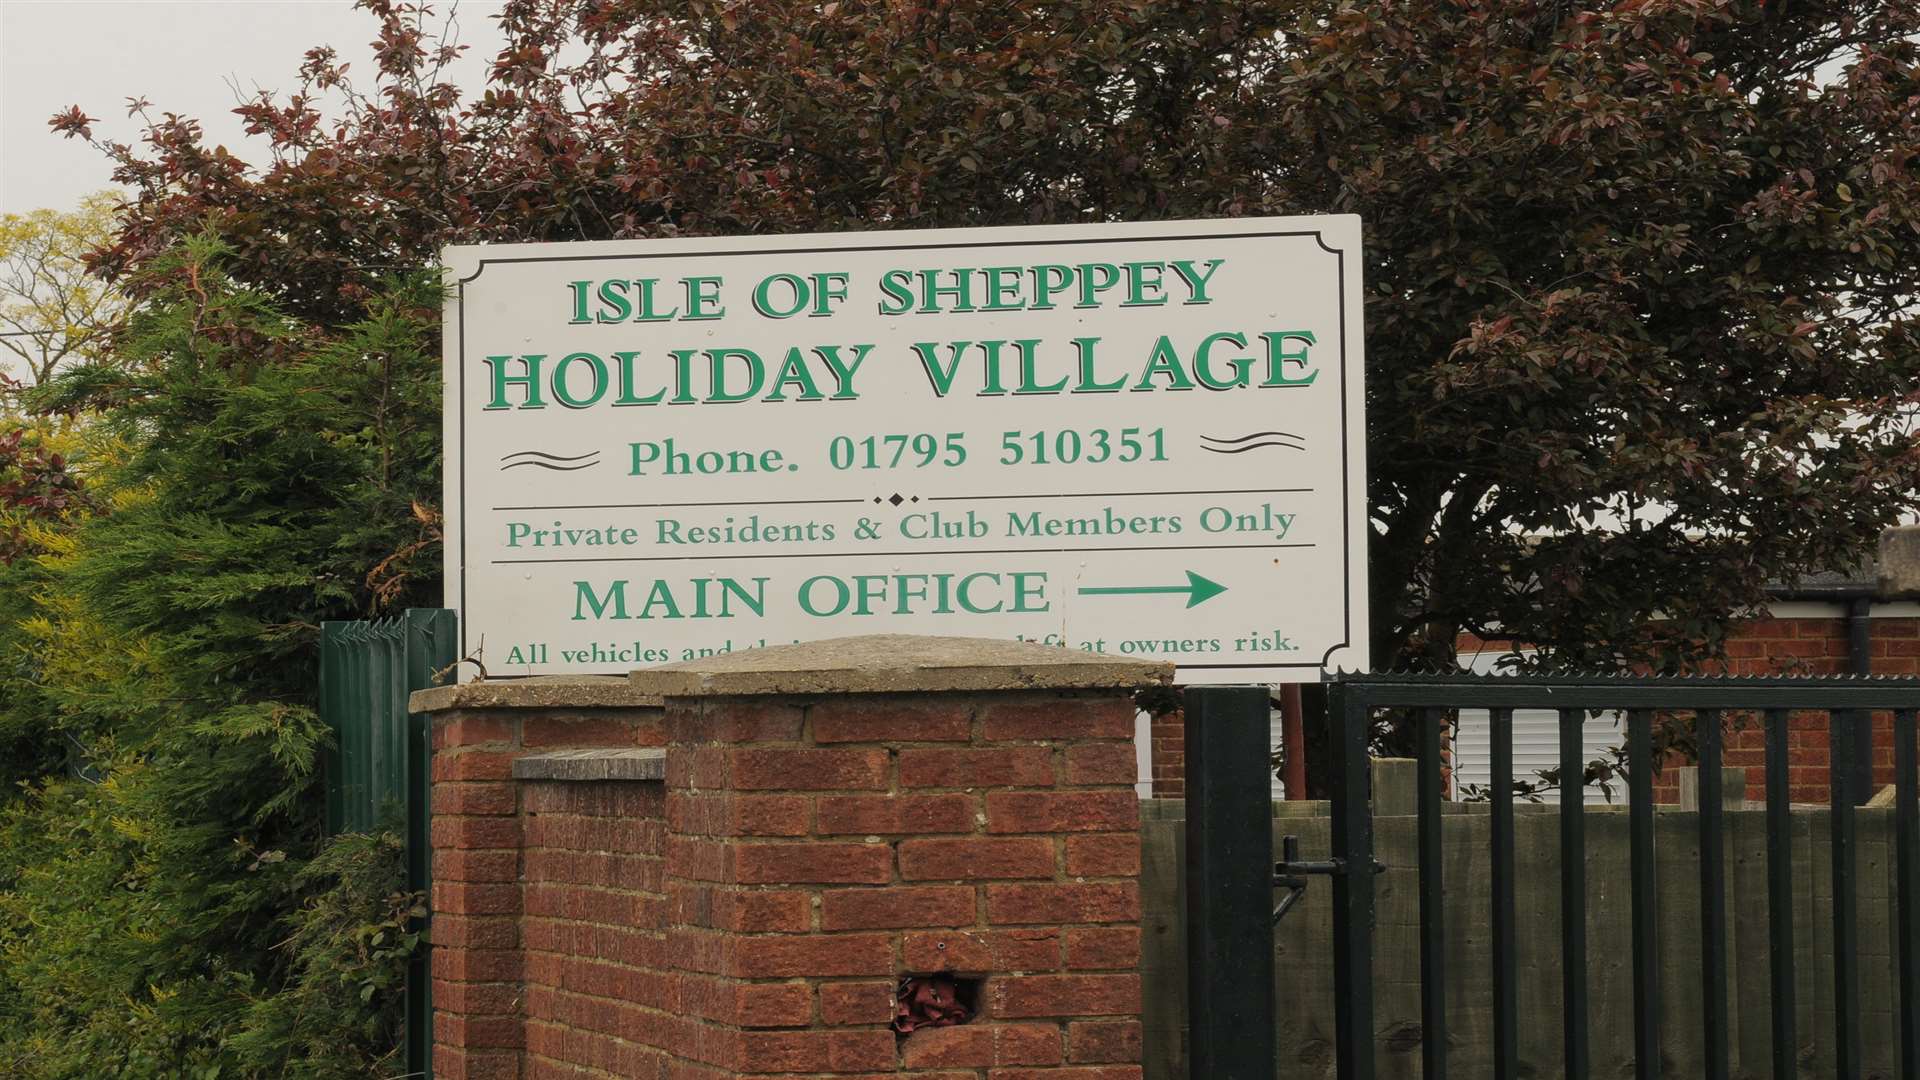 It happened at the Isle of Sheppey Holiday Village